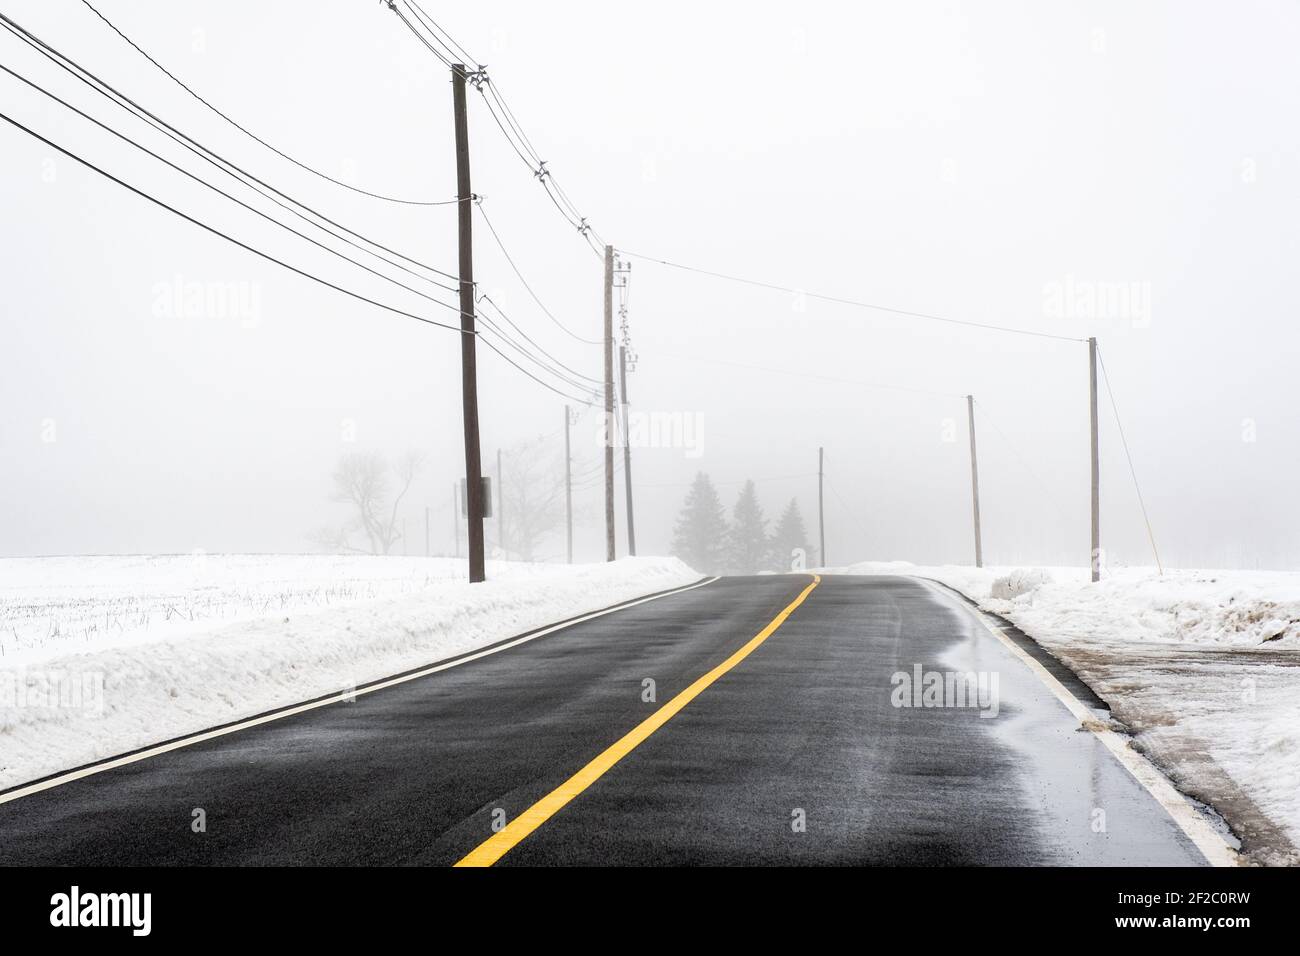 A road in rural Templeton, Massachusetts on a foggy winter's day Stock Photo